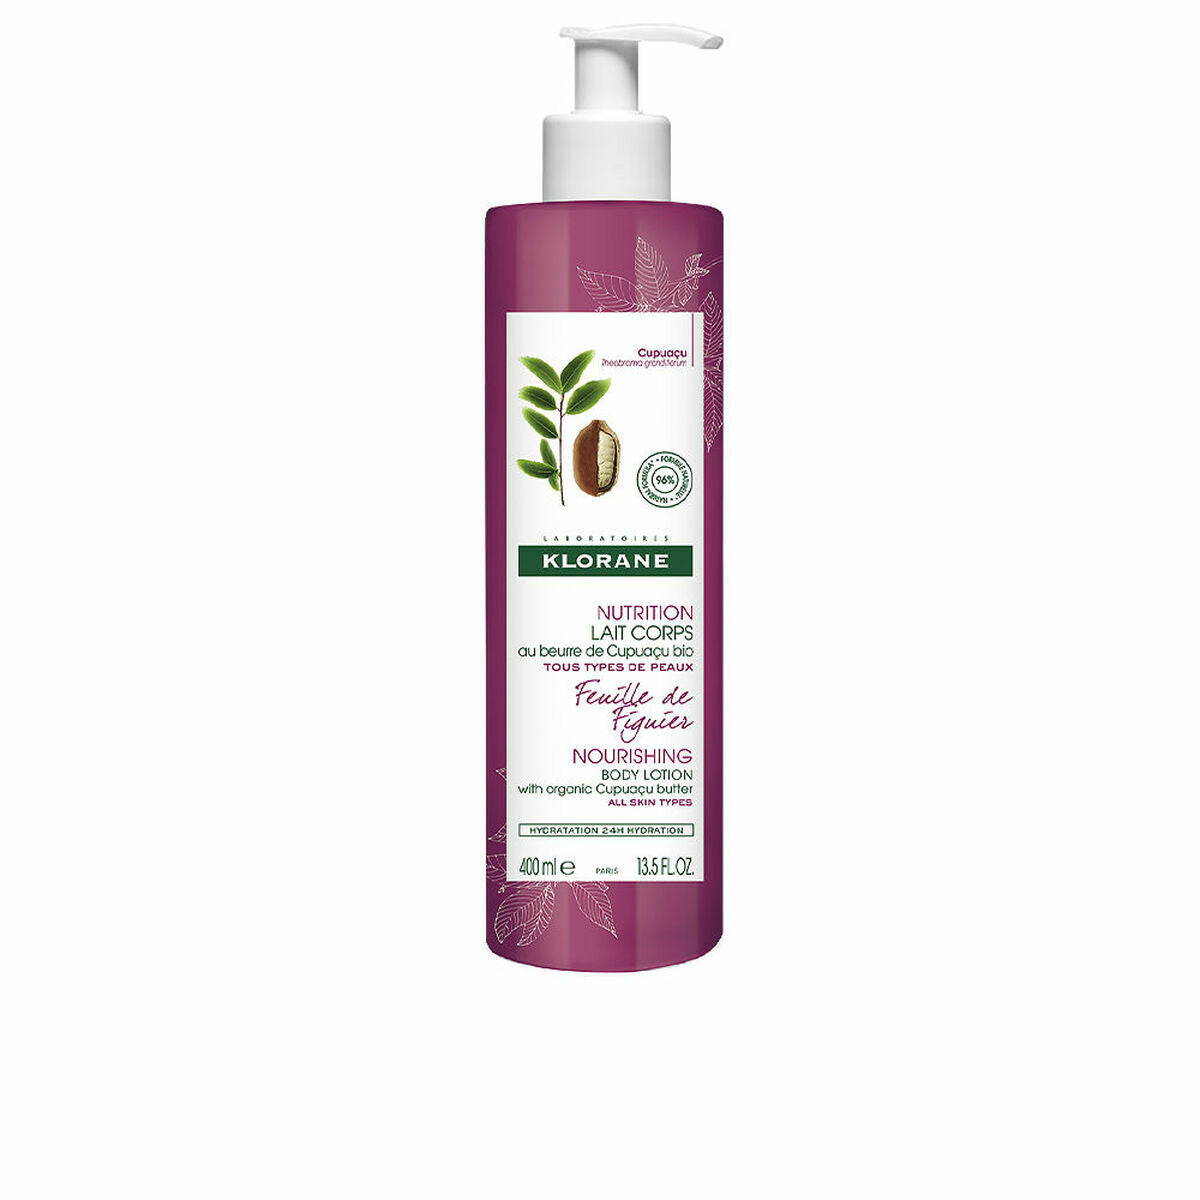 Hydrating Body Lotion Klorane Figueira